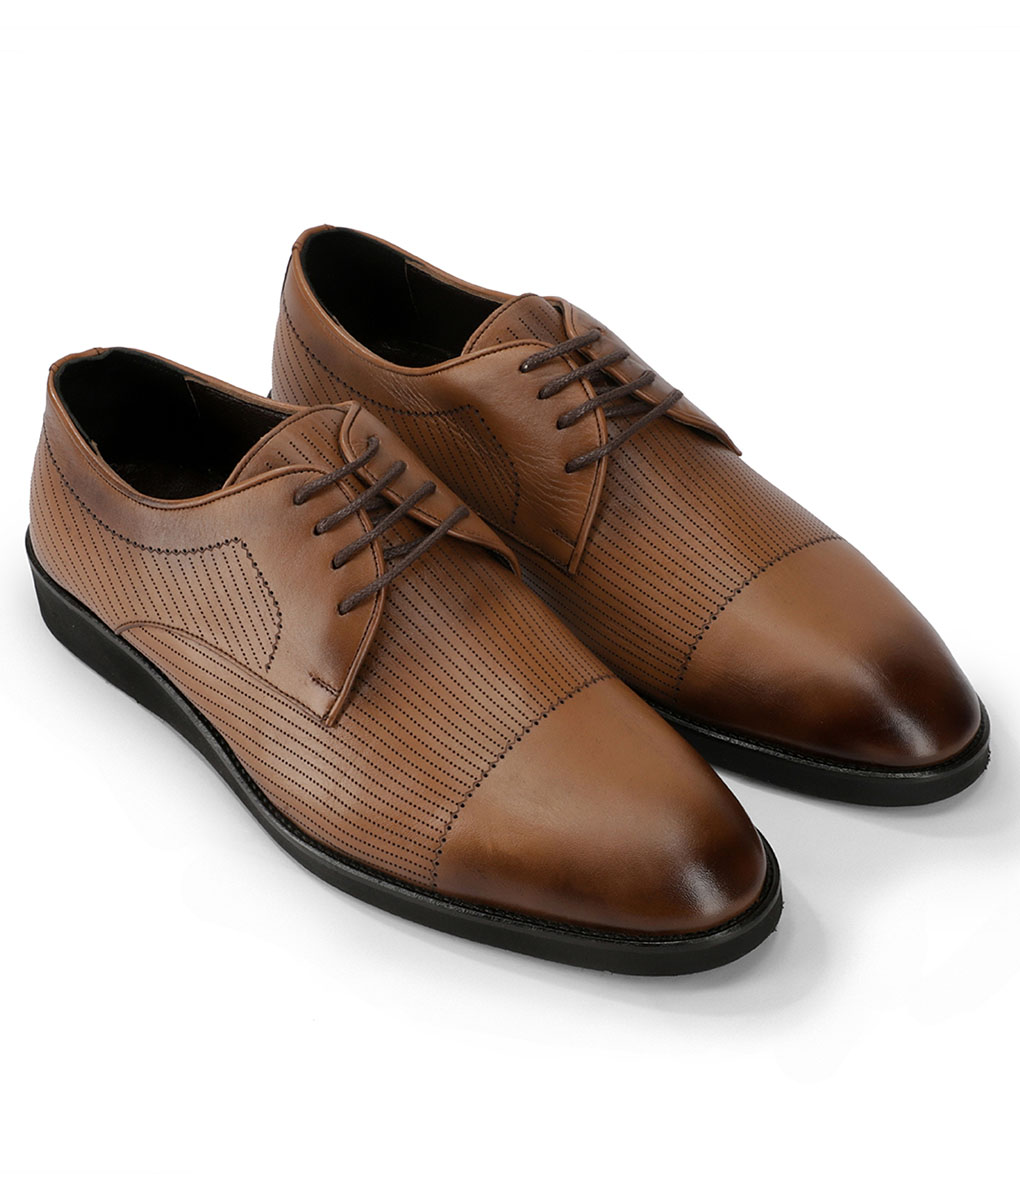 Men's Tan Brown Lace-up Formal Leather Shoes